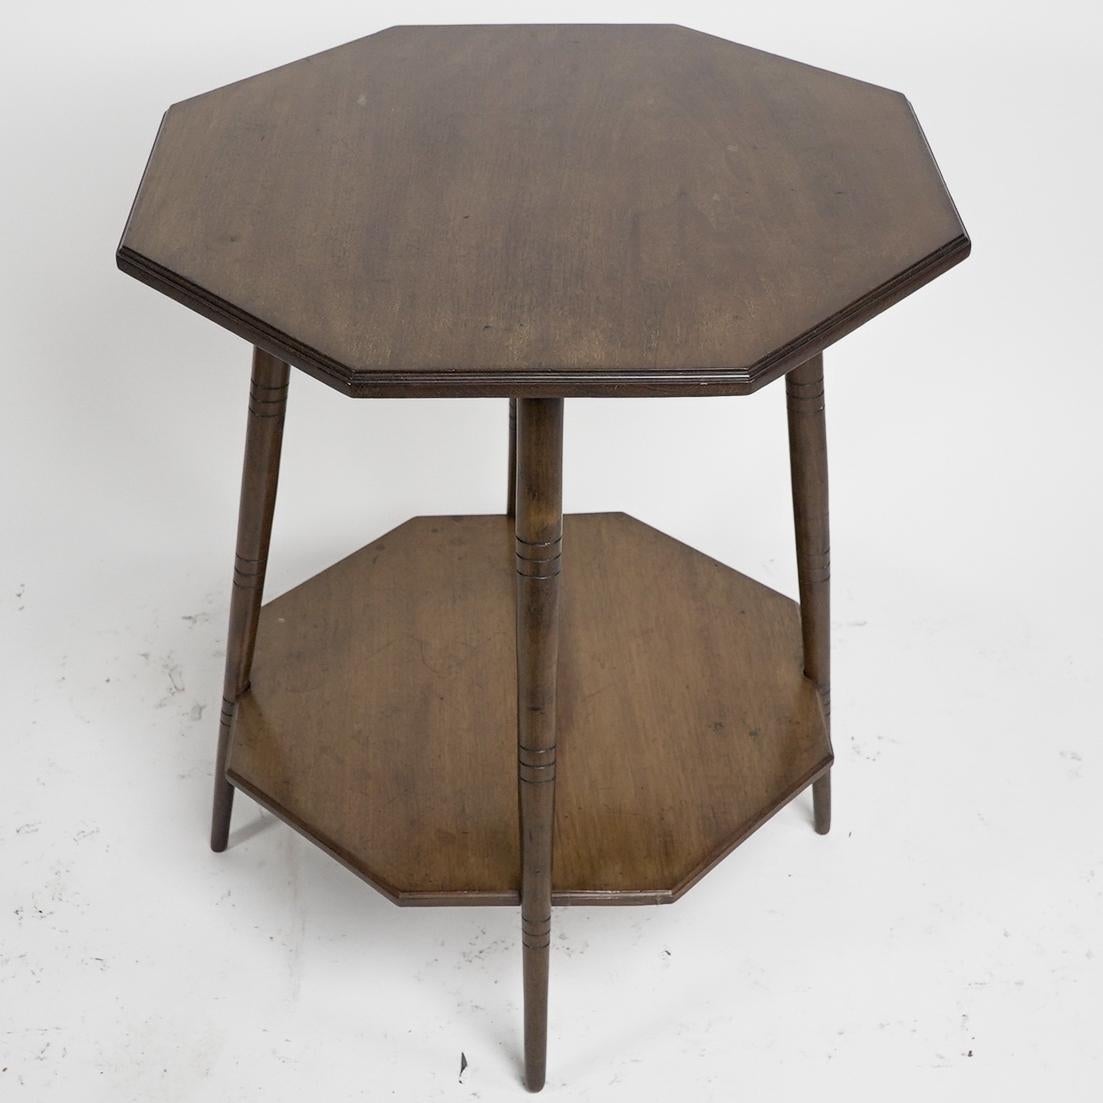 Collinson & Lock attributed. An Aesthetic Movement Walnut octogonal two tier side table on splayed and fine ring turn legs, reminiscent of some of the legs Godwin chased around.